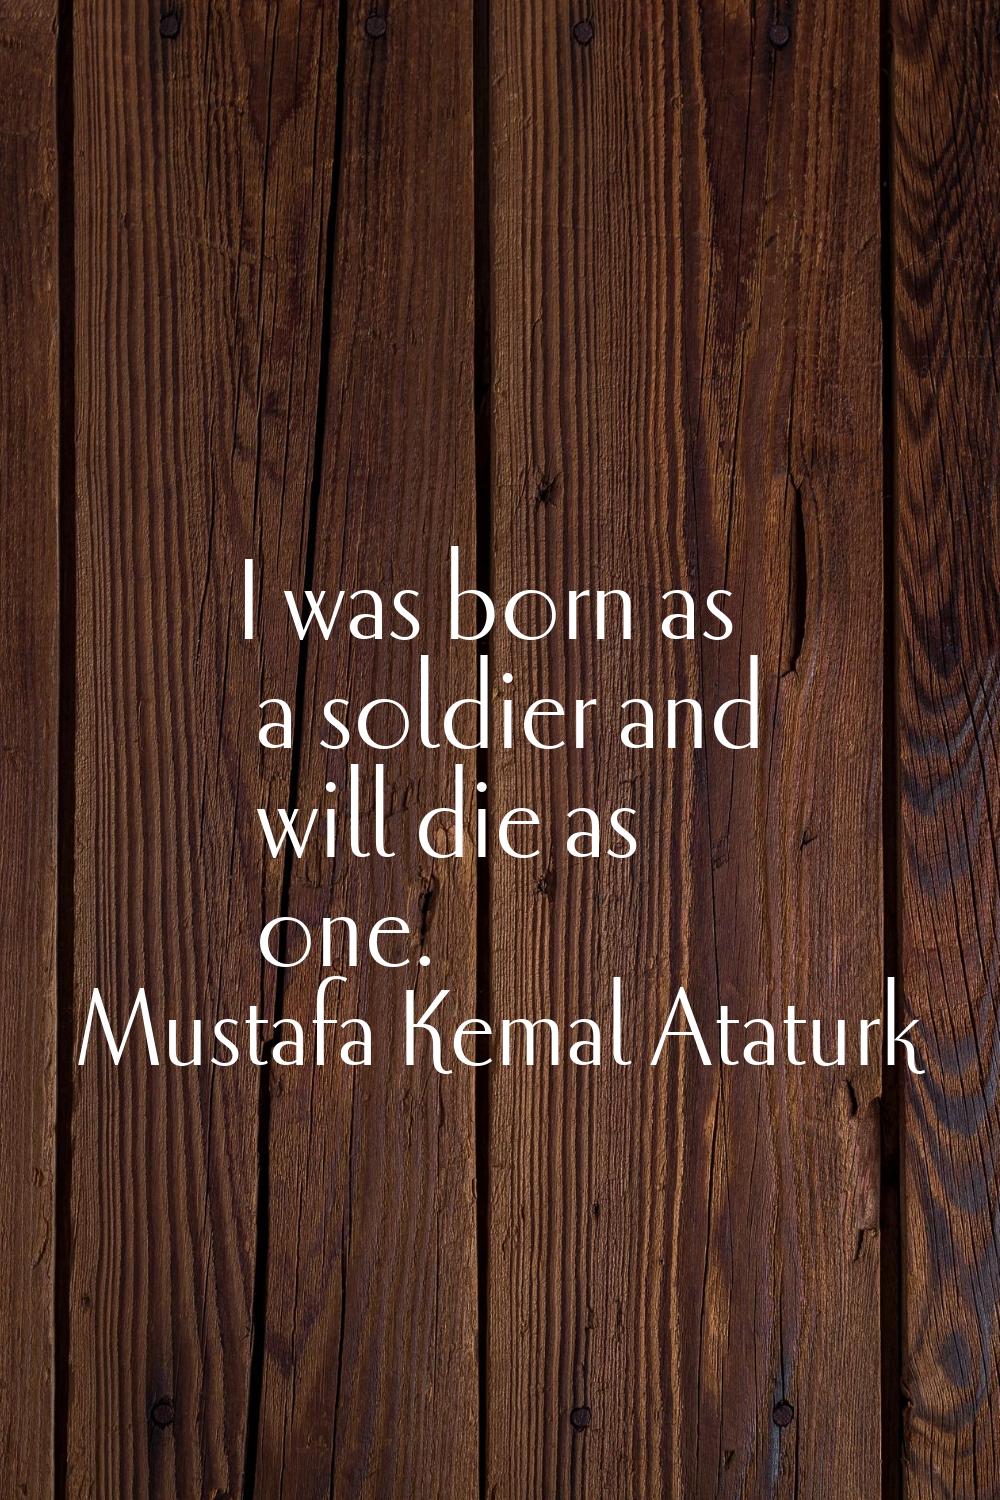 I was born as a soldier and will die as one.